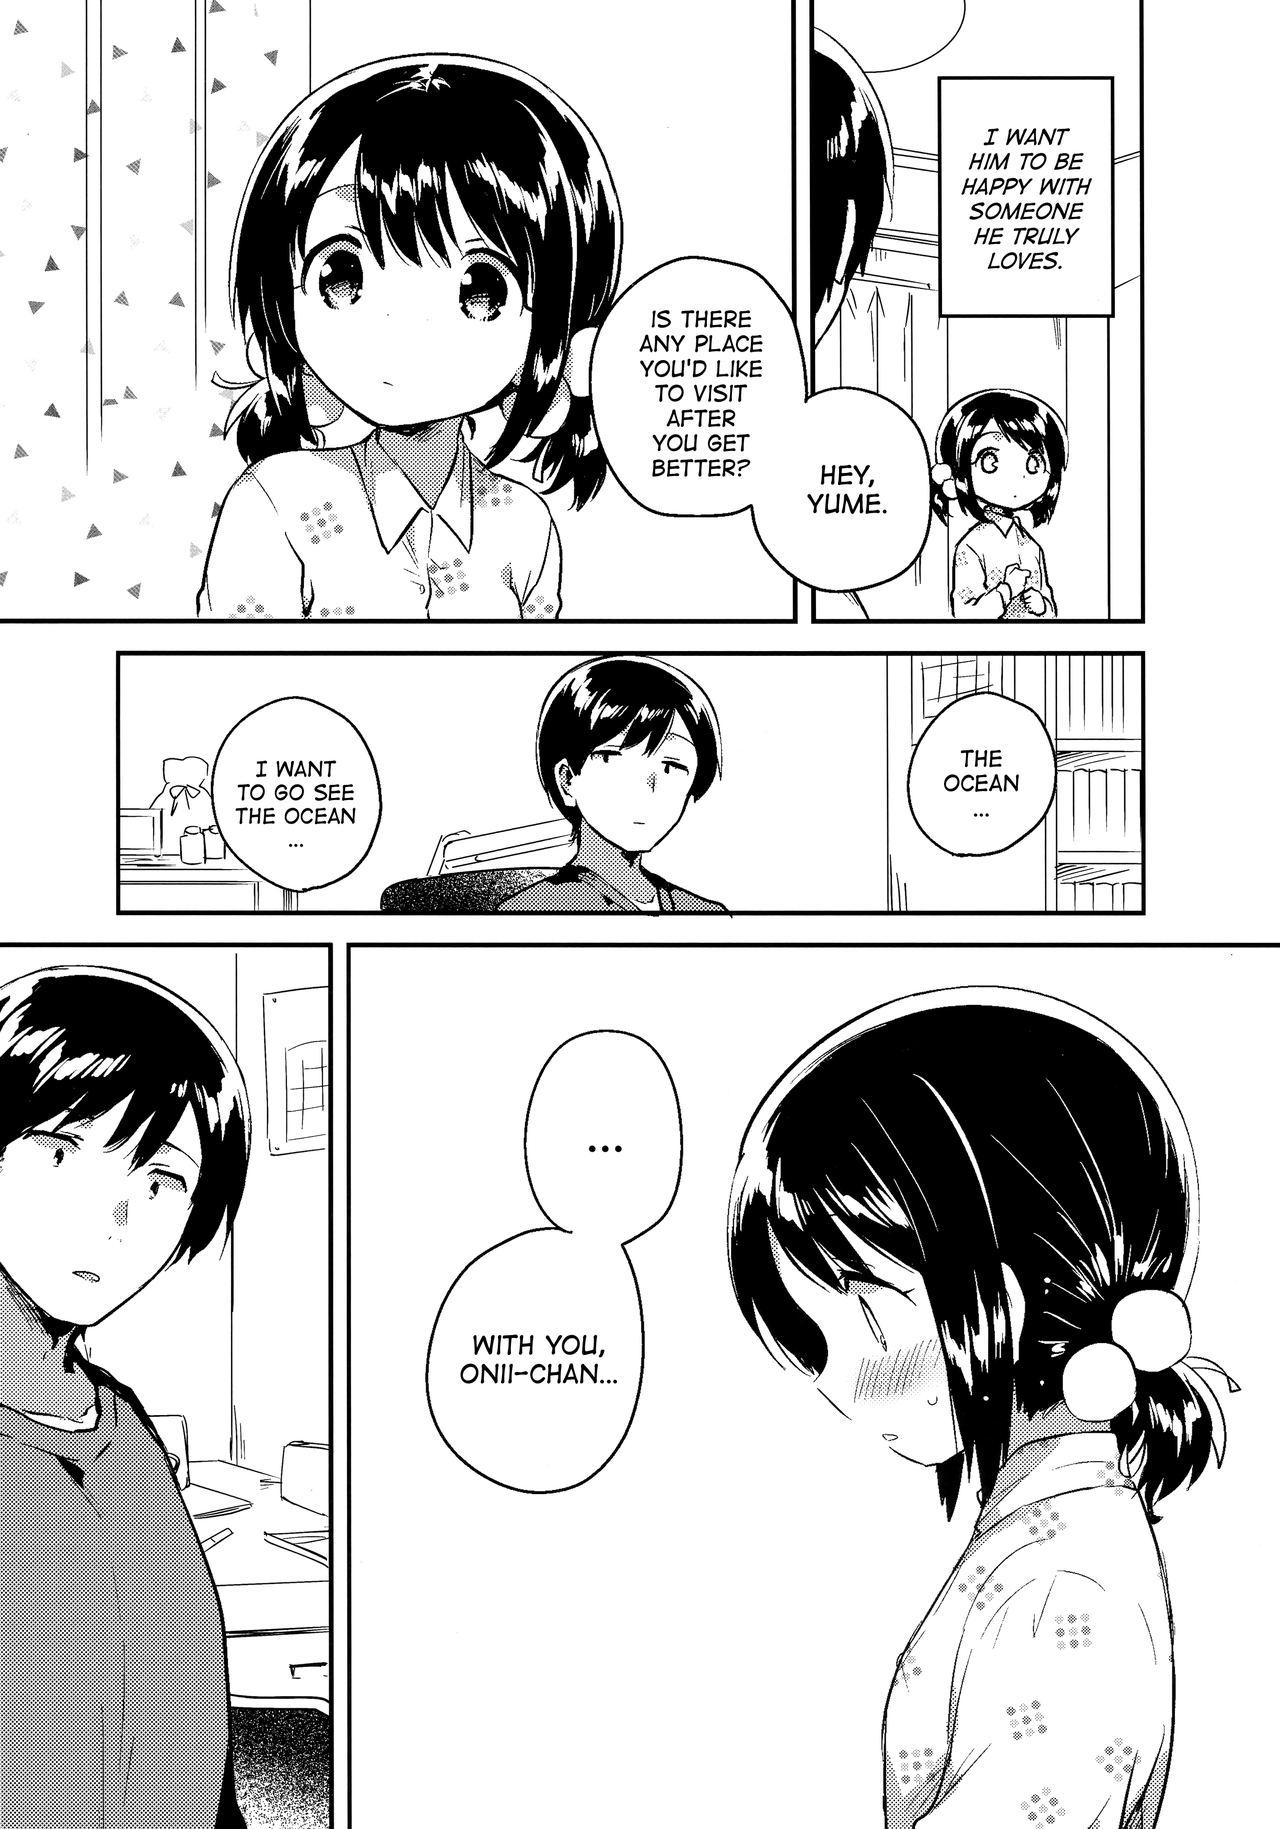 Full Movie Imouto wa Sickness no Omake | My Little Sister is Sickly: Extra Story Canadian - Page 7